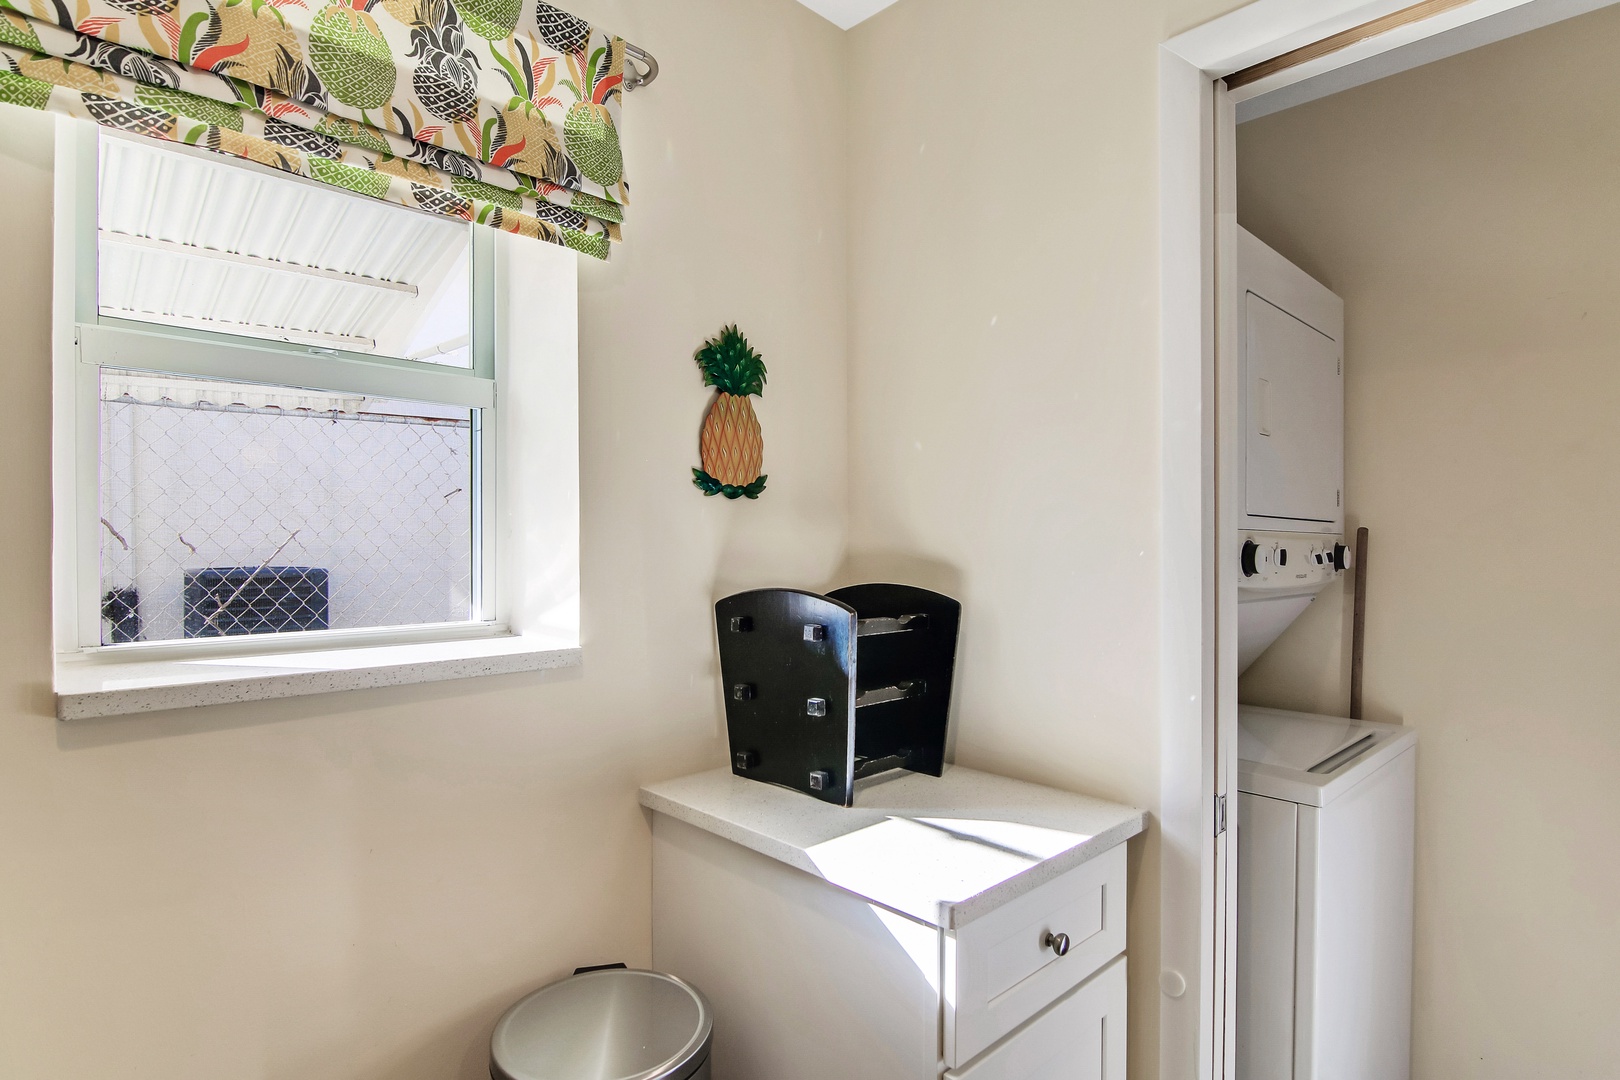 Private laundry is available for your stay, tucked away off the kitchen